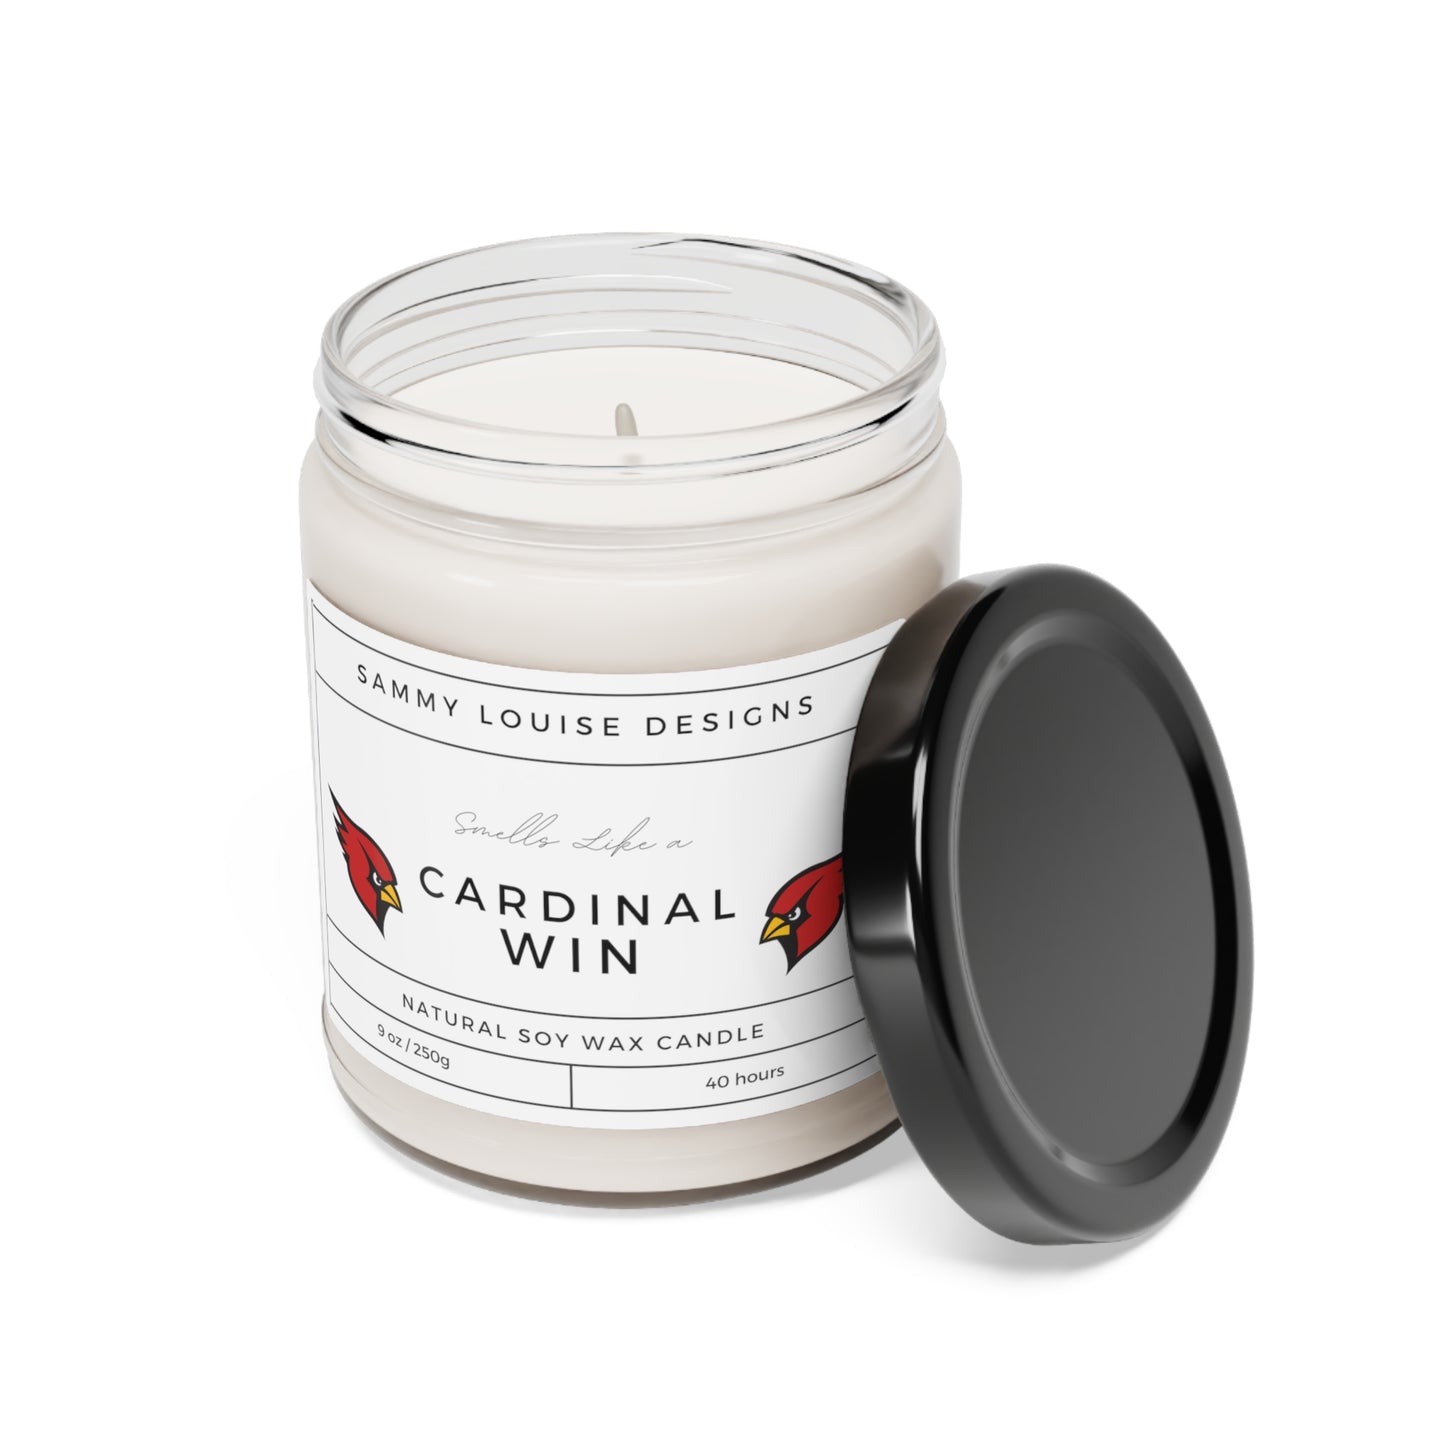 Smells like a Cardinal win Scented Soy Candle, 9oz